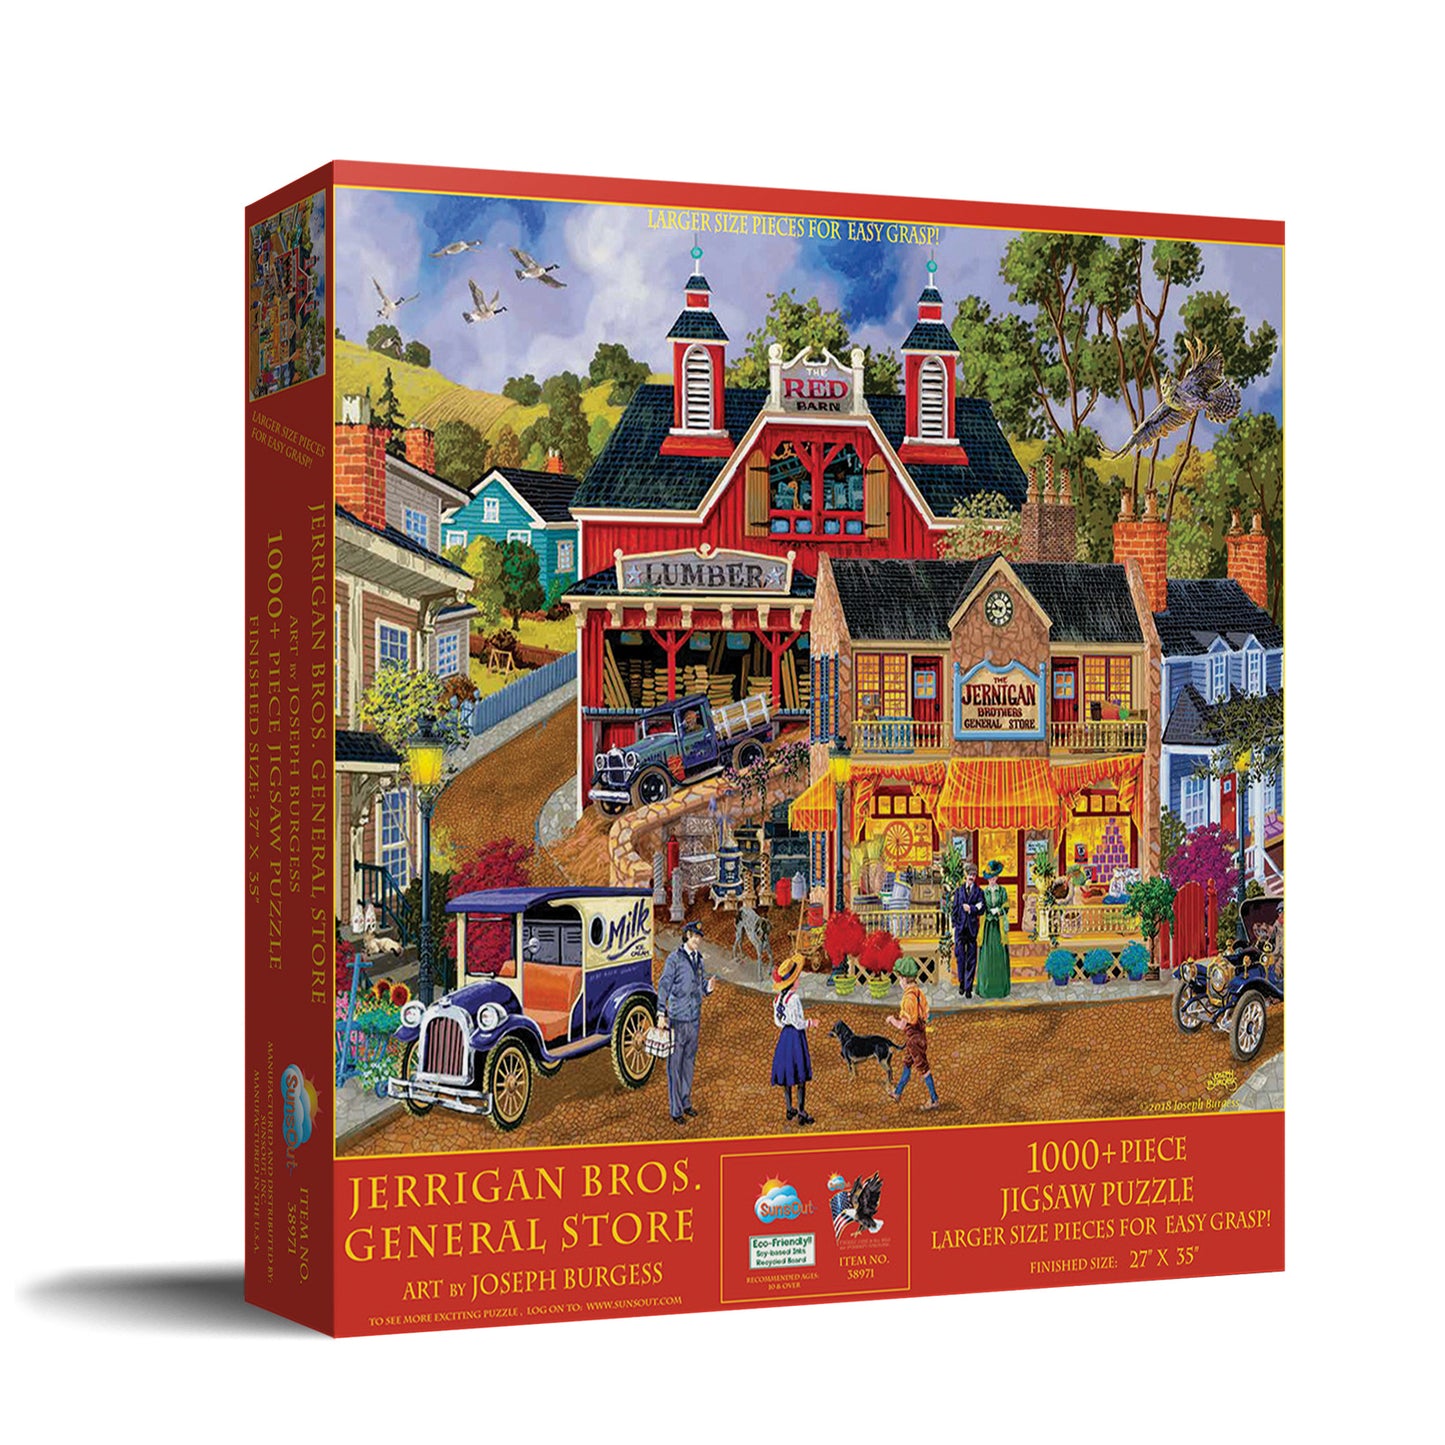 Jerrigan Bros General Store 1000 Piece Jigsaw Puzzle by SunsOut